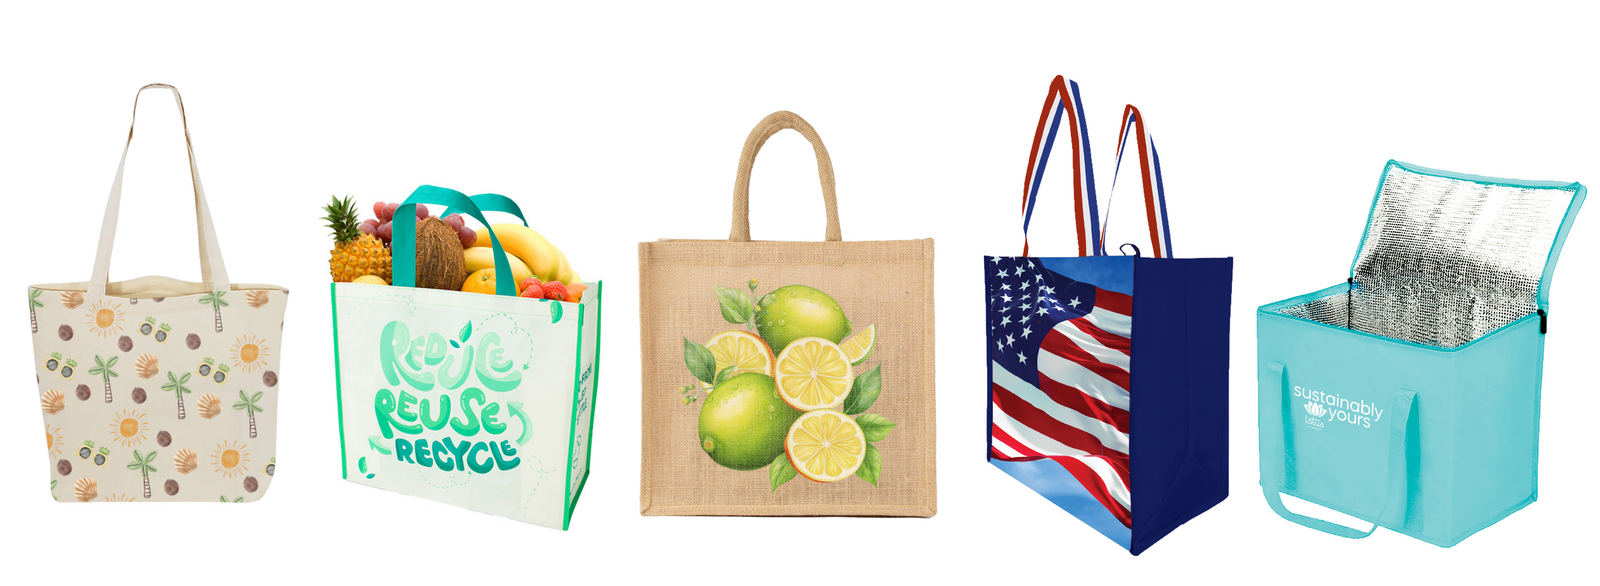 Double R Bags Medium Laminated Cotton Canvas Grocery Shopping Bags for  Carry Milk Fruits Vegetable with Reinforced Handles Jhola Bag - Kitchen  Essential : Amazon.in: Fashion